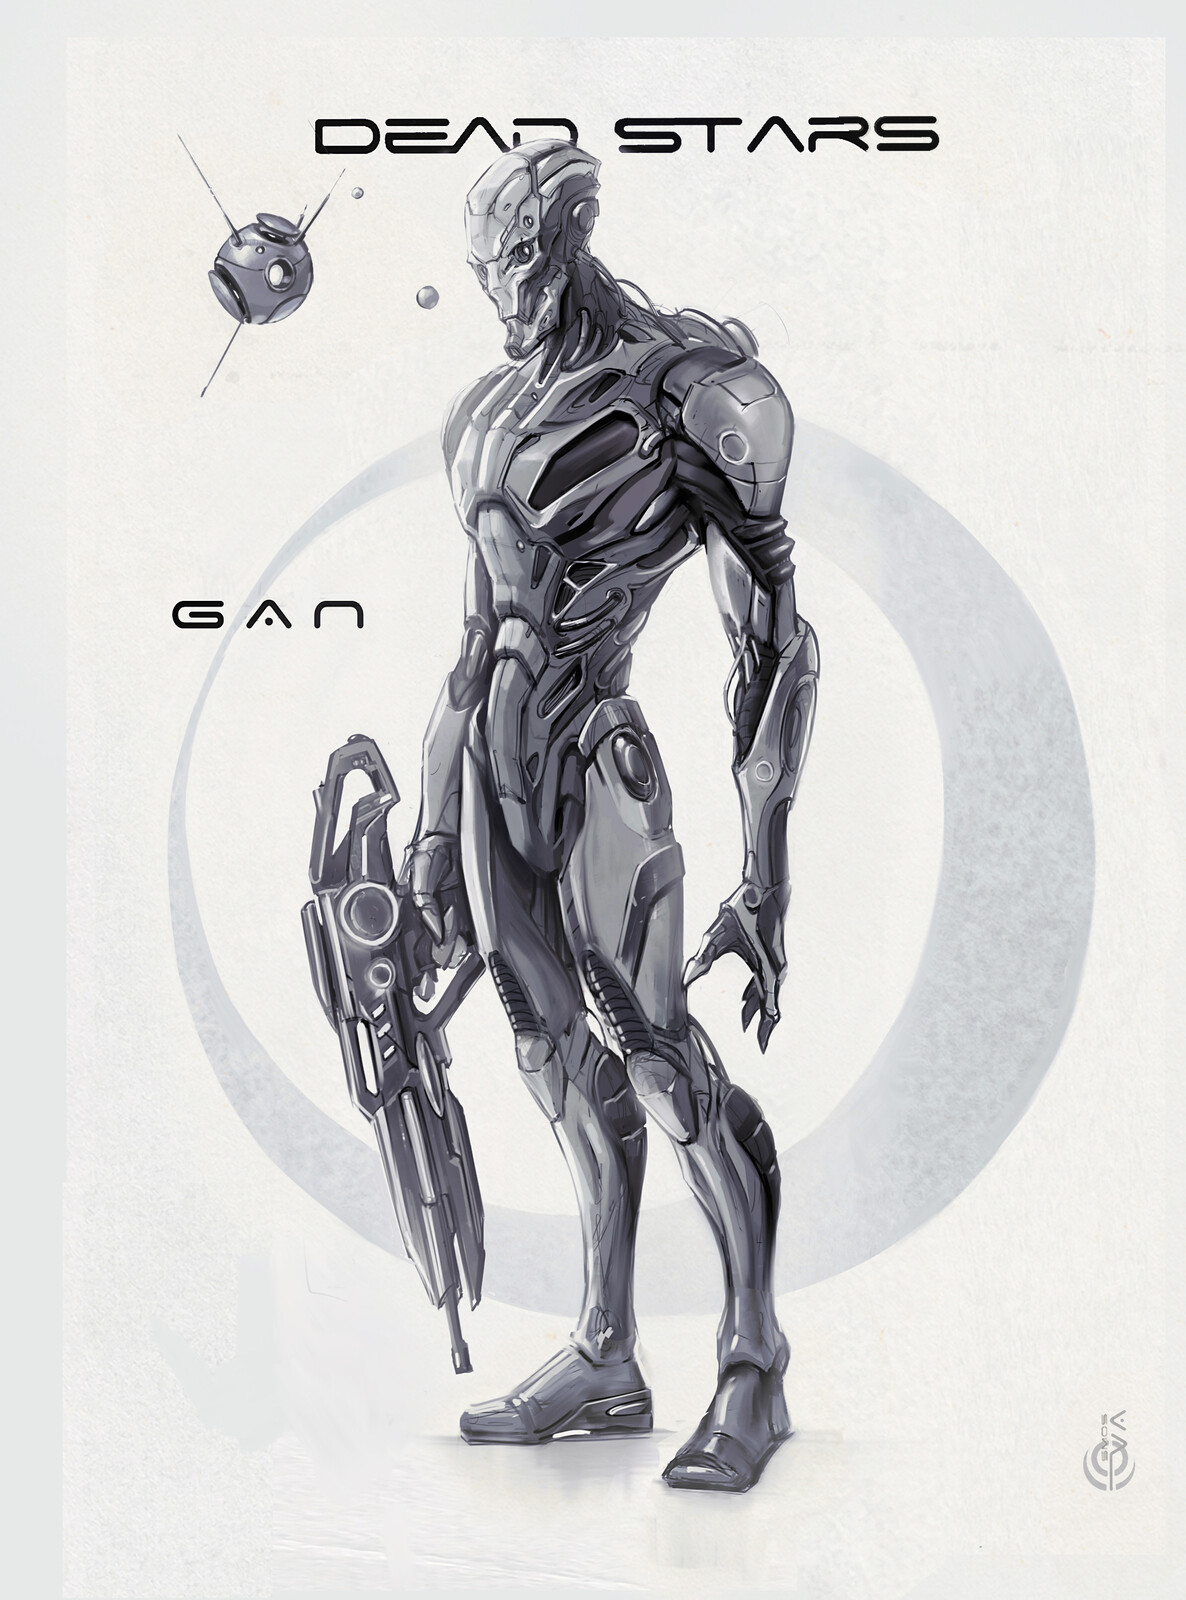 Day 5
Design and concept of the character Gan, for my personal project Dead Stars.
